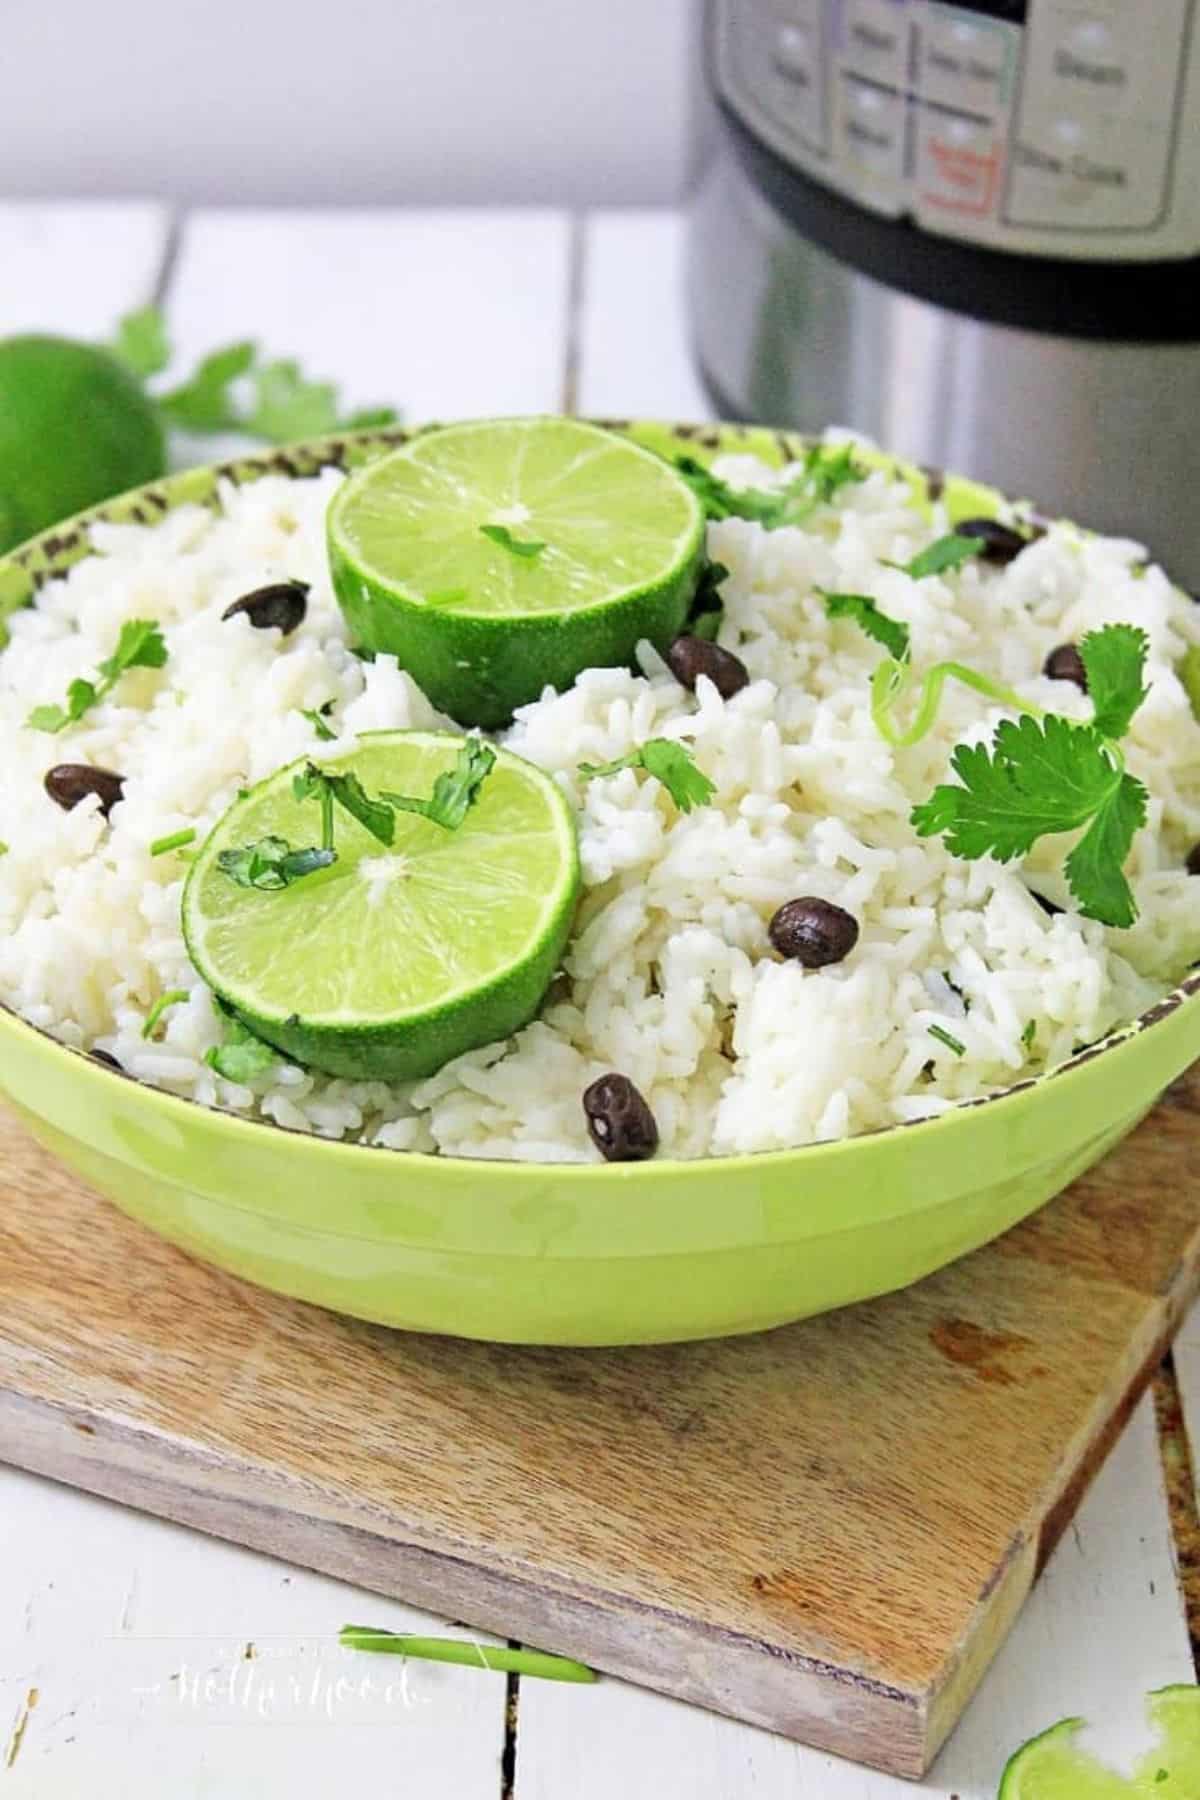 A guide on how to reheat a bowl of cilantro lime rice with black beans garnished with lime wedges on a wooden cutting board.